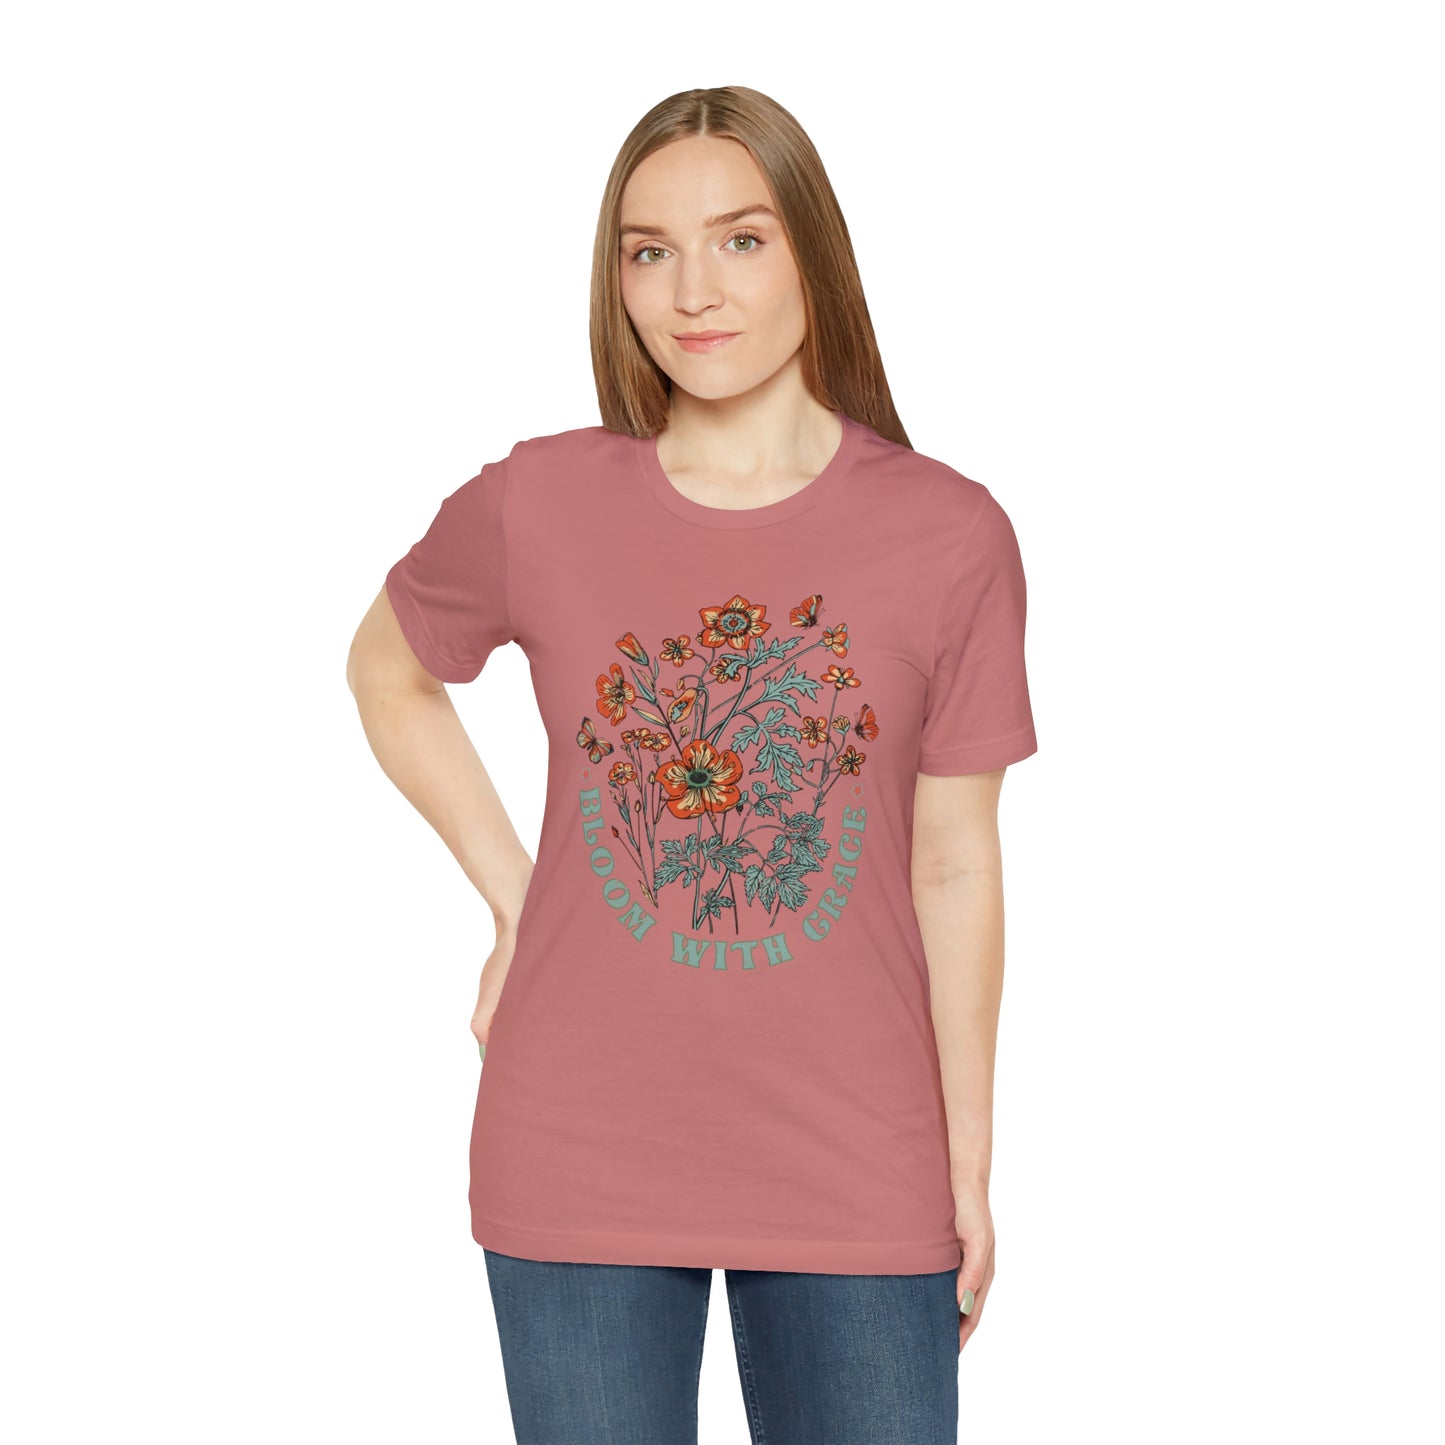 "Bloom With Grace" Bella Canvas Short Sleeve Tee